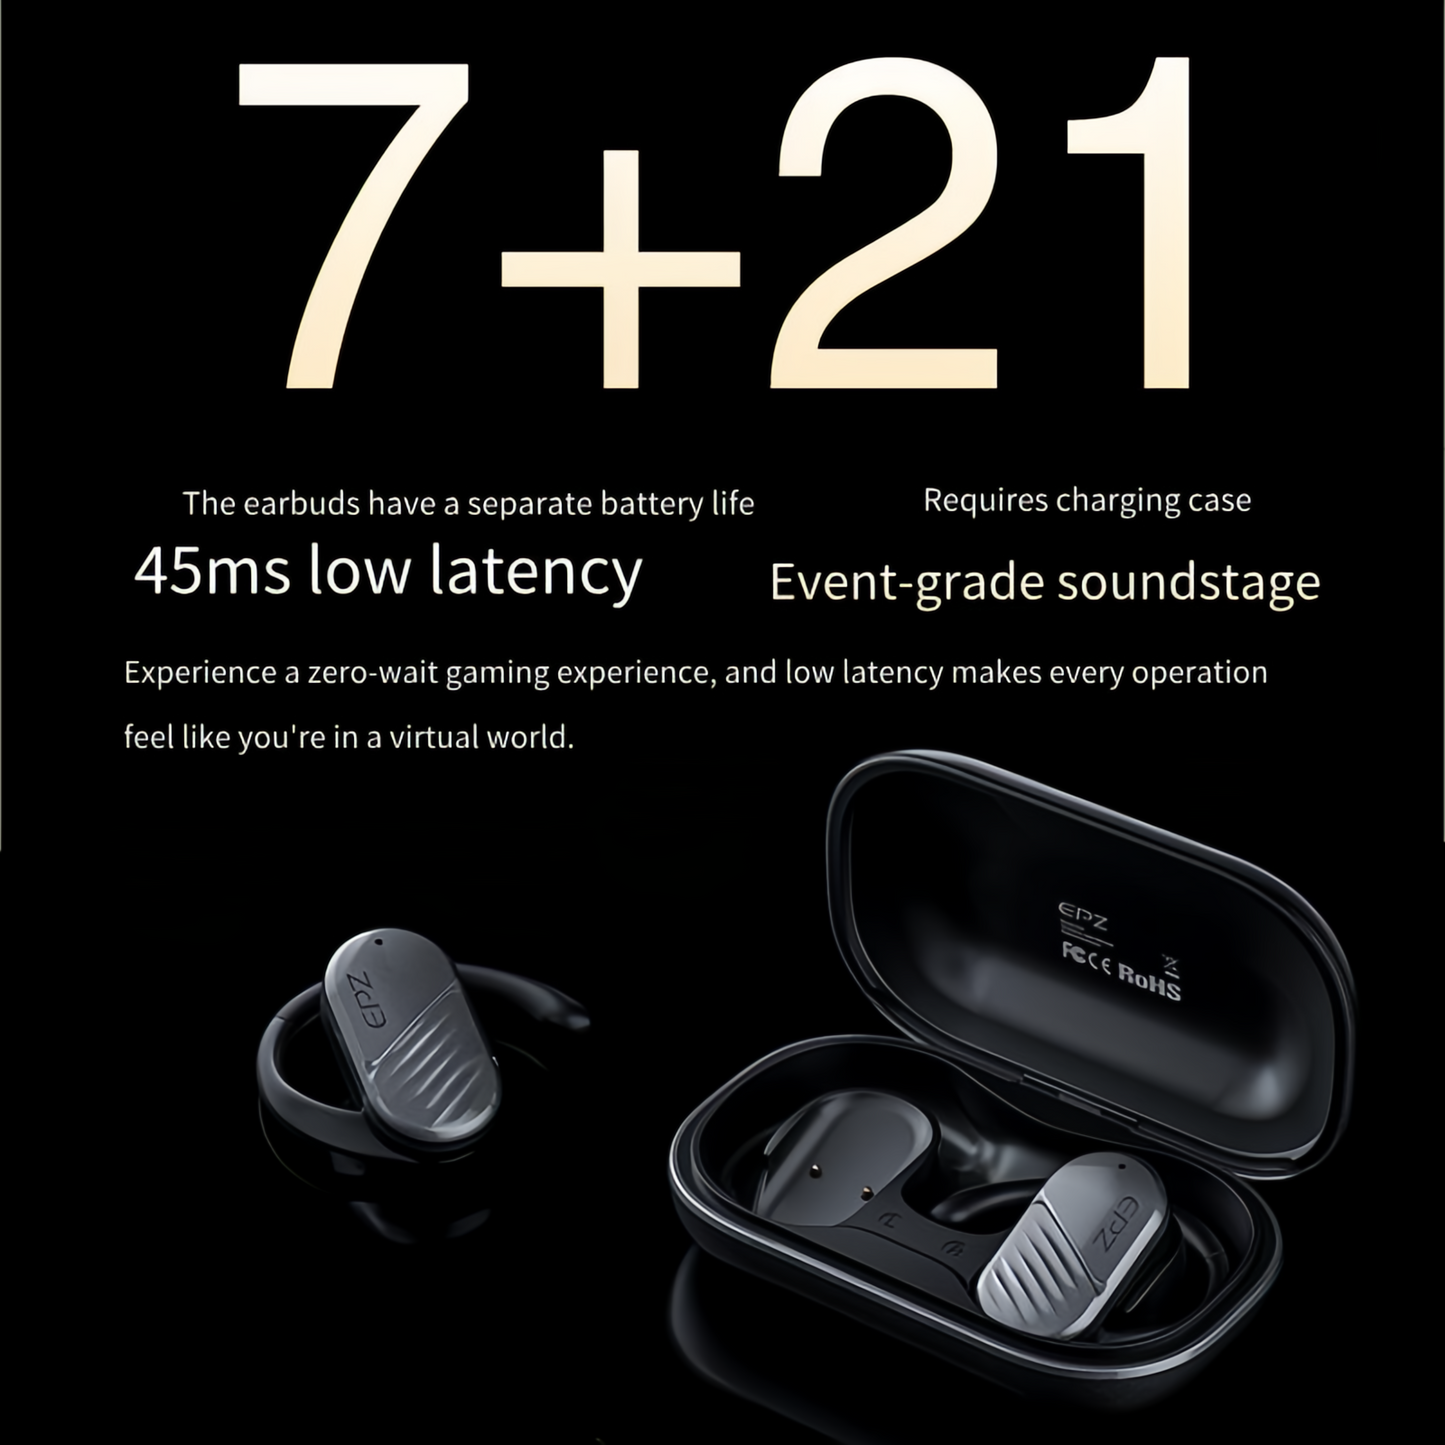 EPZ Open-Ear Bone Conduction Memory, Sports Headphones - Sweat-resistant wireless headphones for workouts and running - Built-in microphone(White).